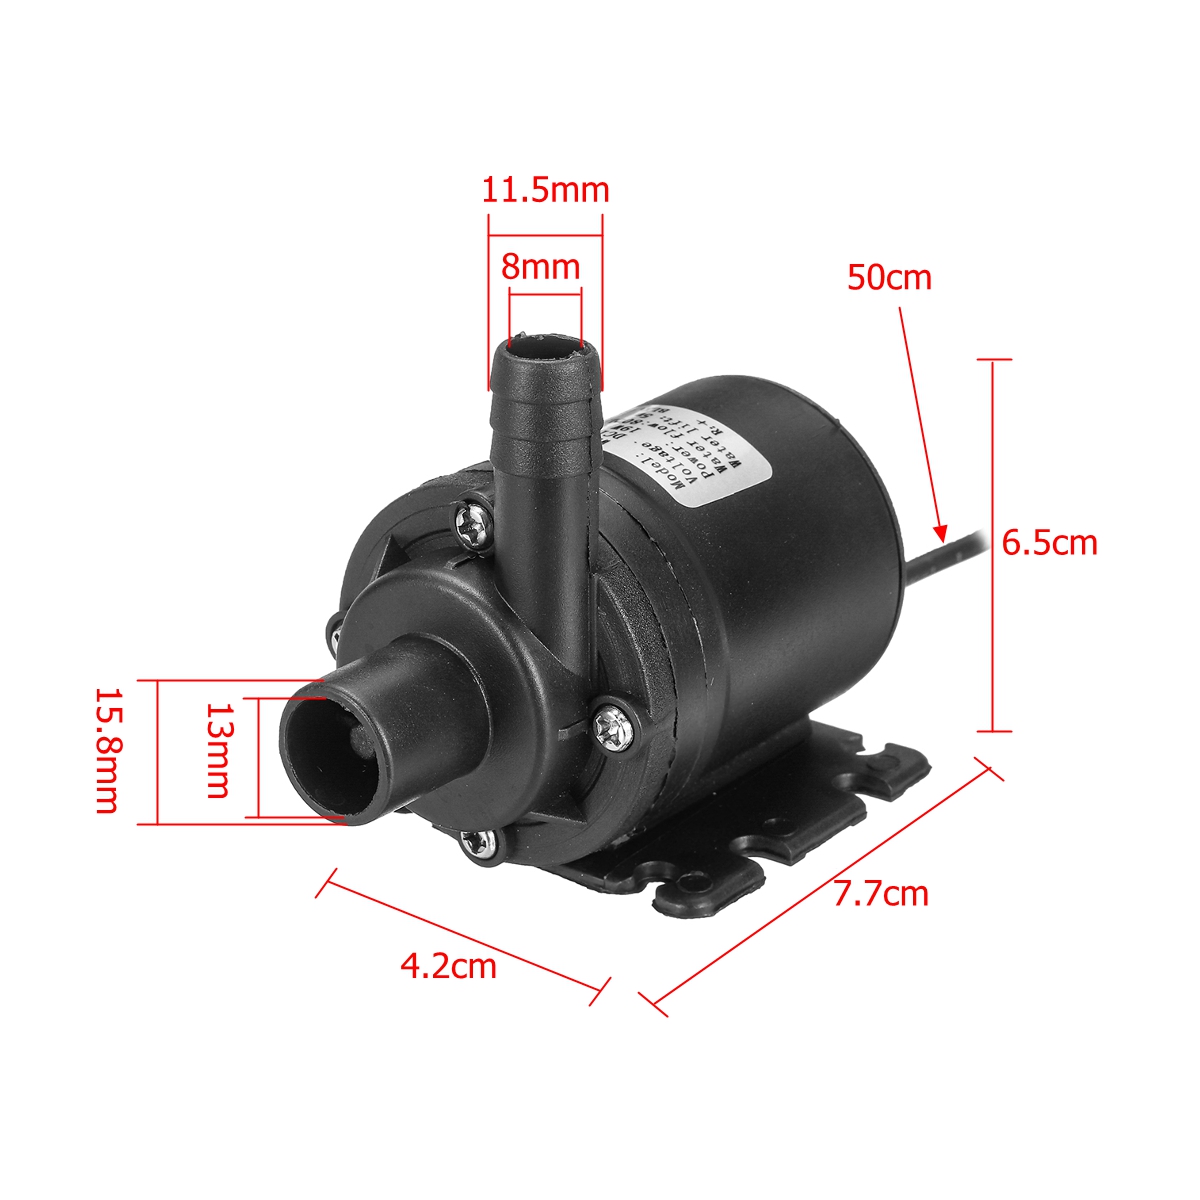 ZYW680-DC-12V-Water-Pump-Ultra-Quiet-Mini-55m-Lift-Brushless-Motor-Submersible-Water-Pump-1531599-5